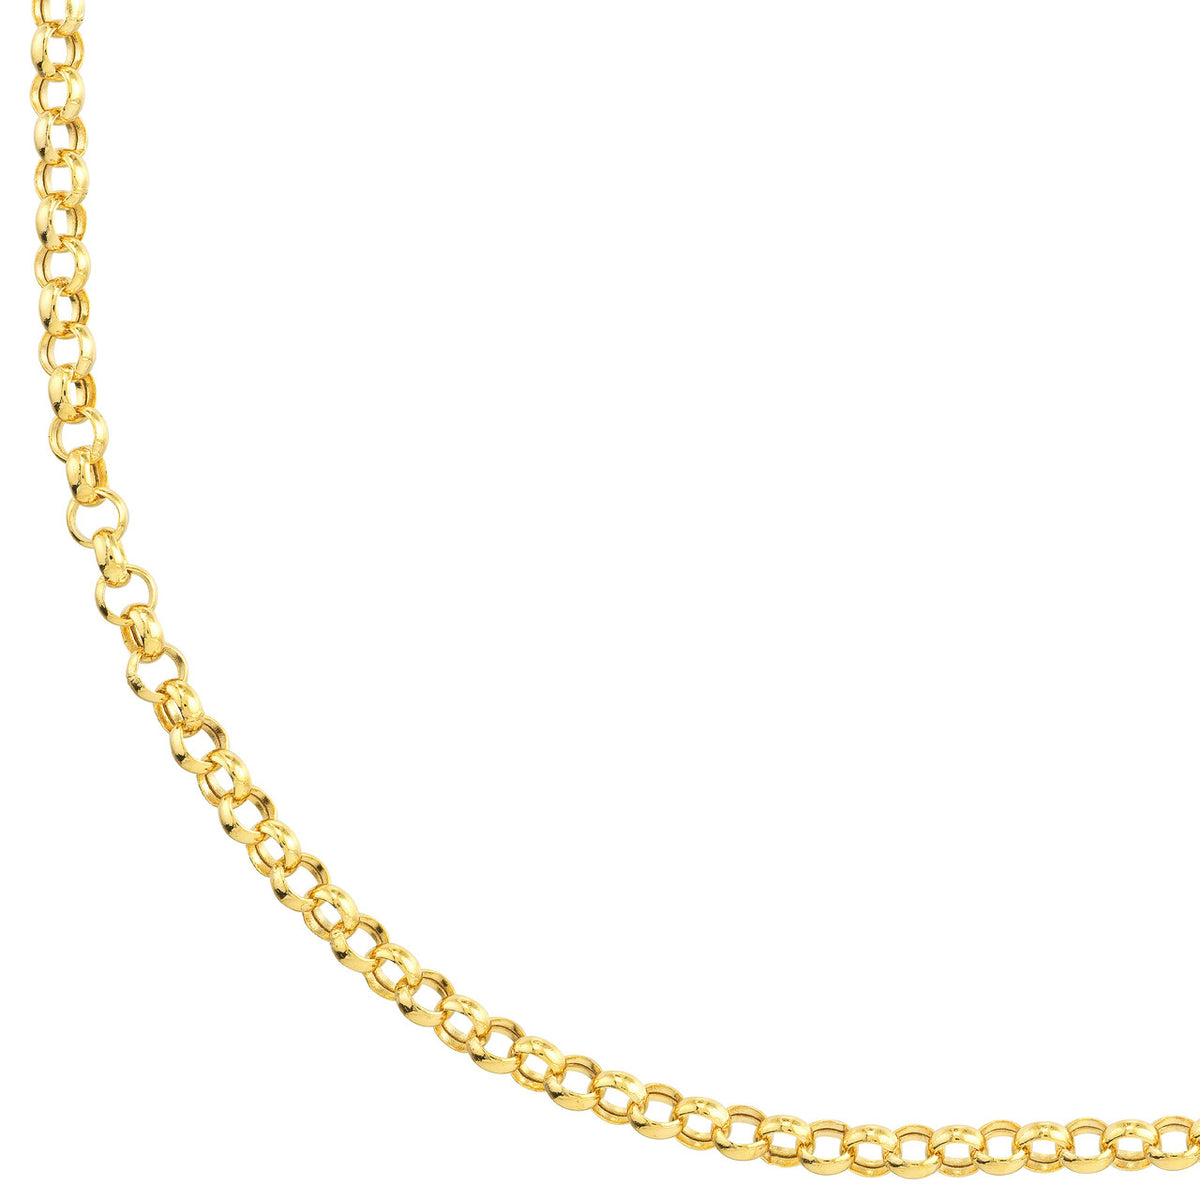 Solid 14K Gold 3.75mm Hollow Rolo Chain Necklace with Lobster Lock